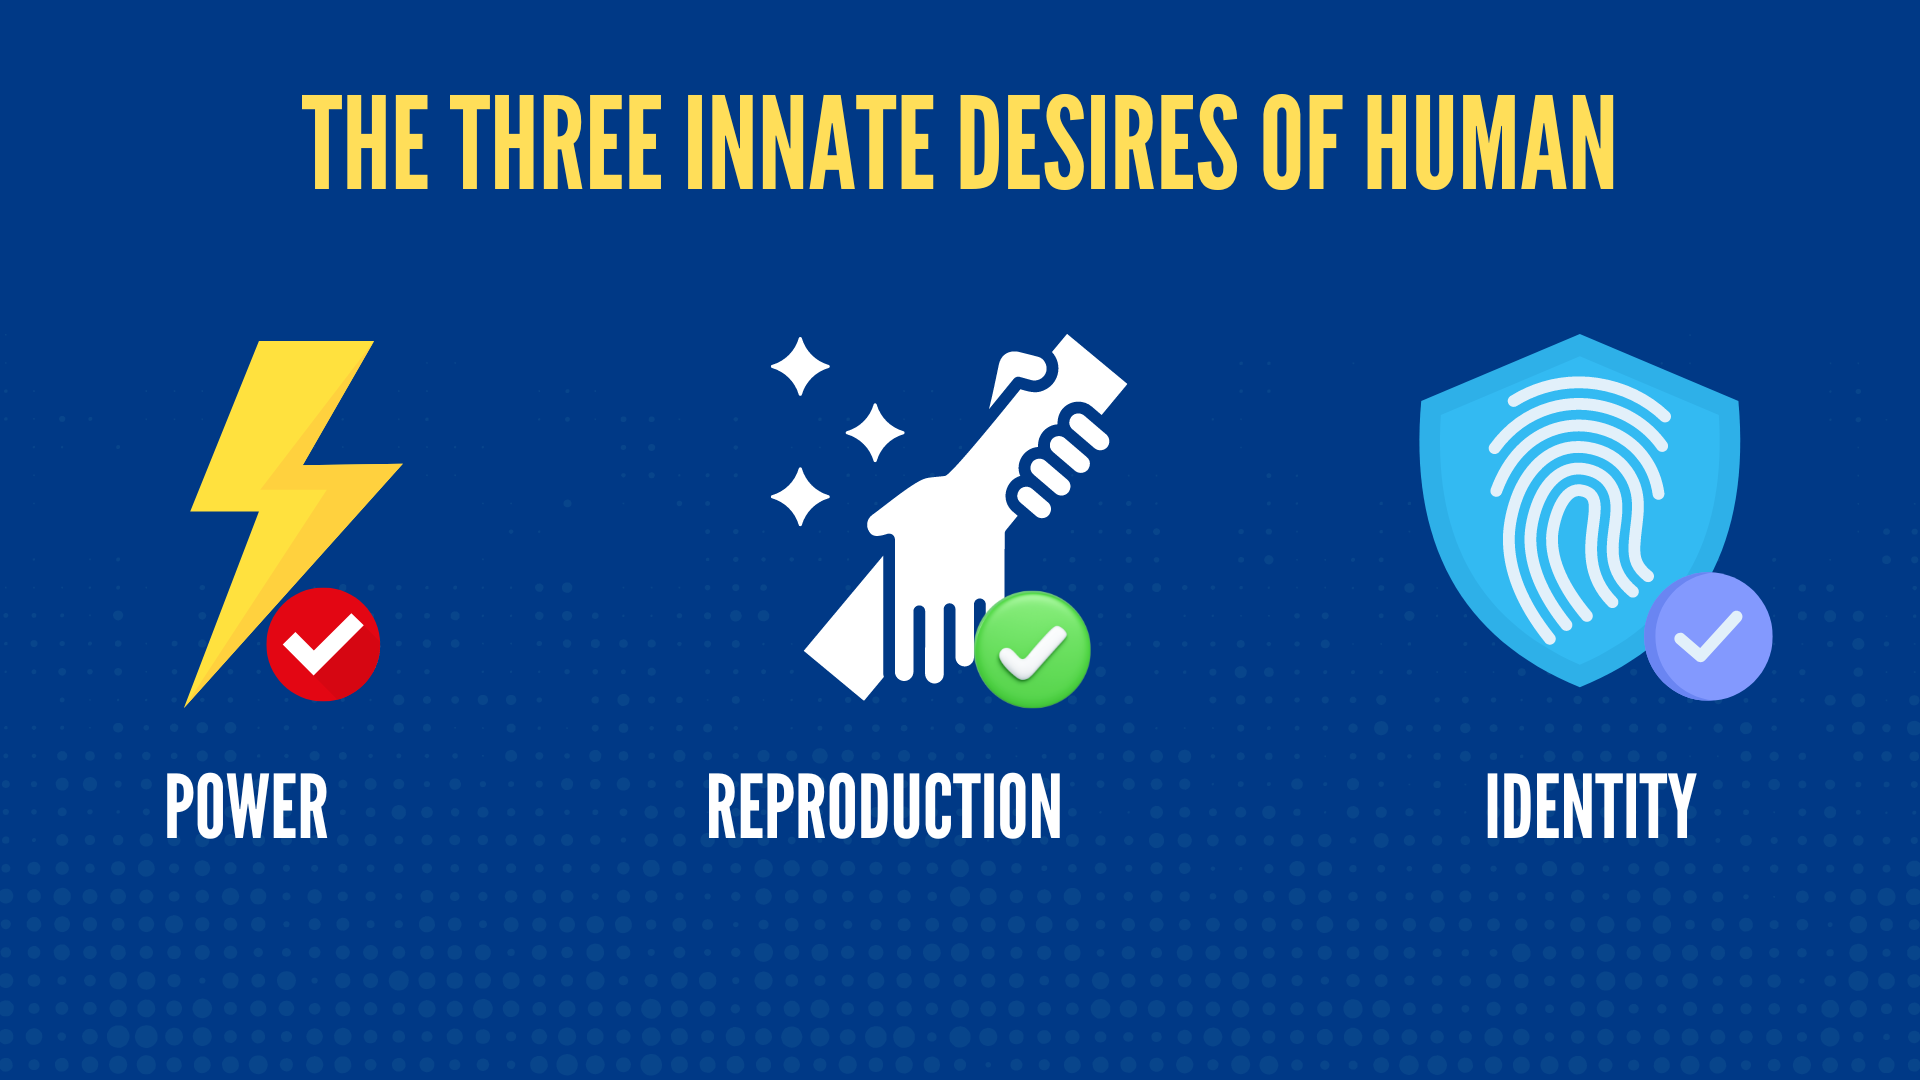 Graphics showing the three major innate desires of human